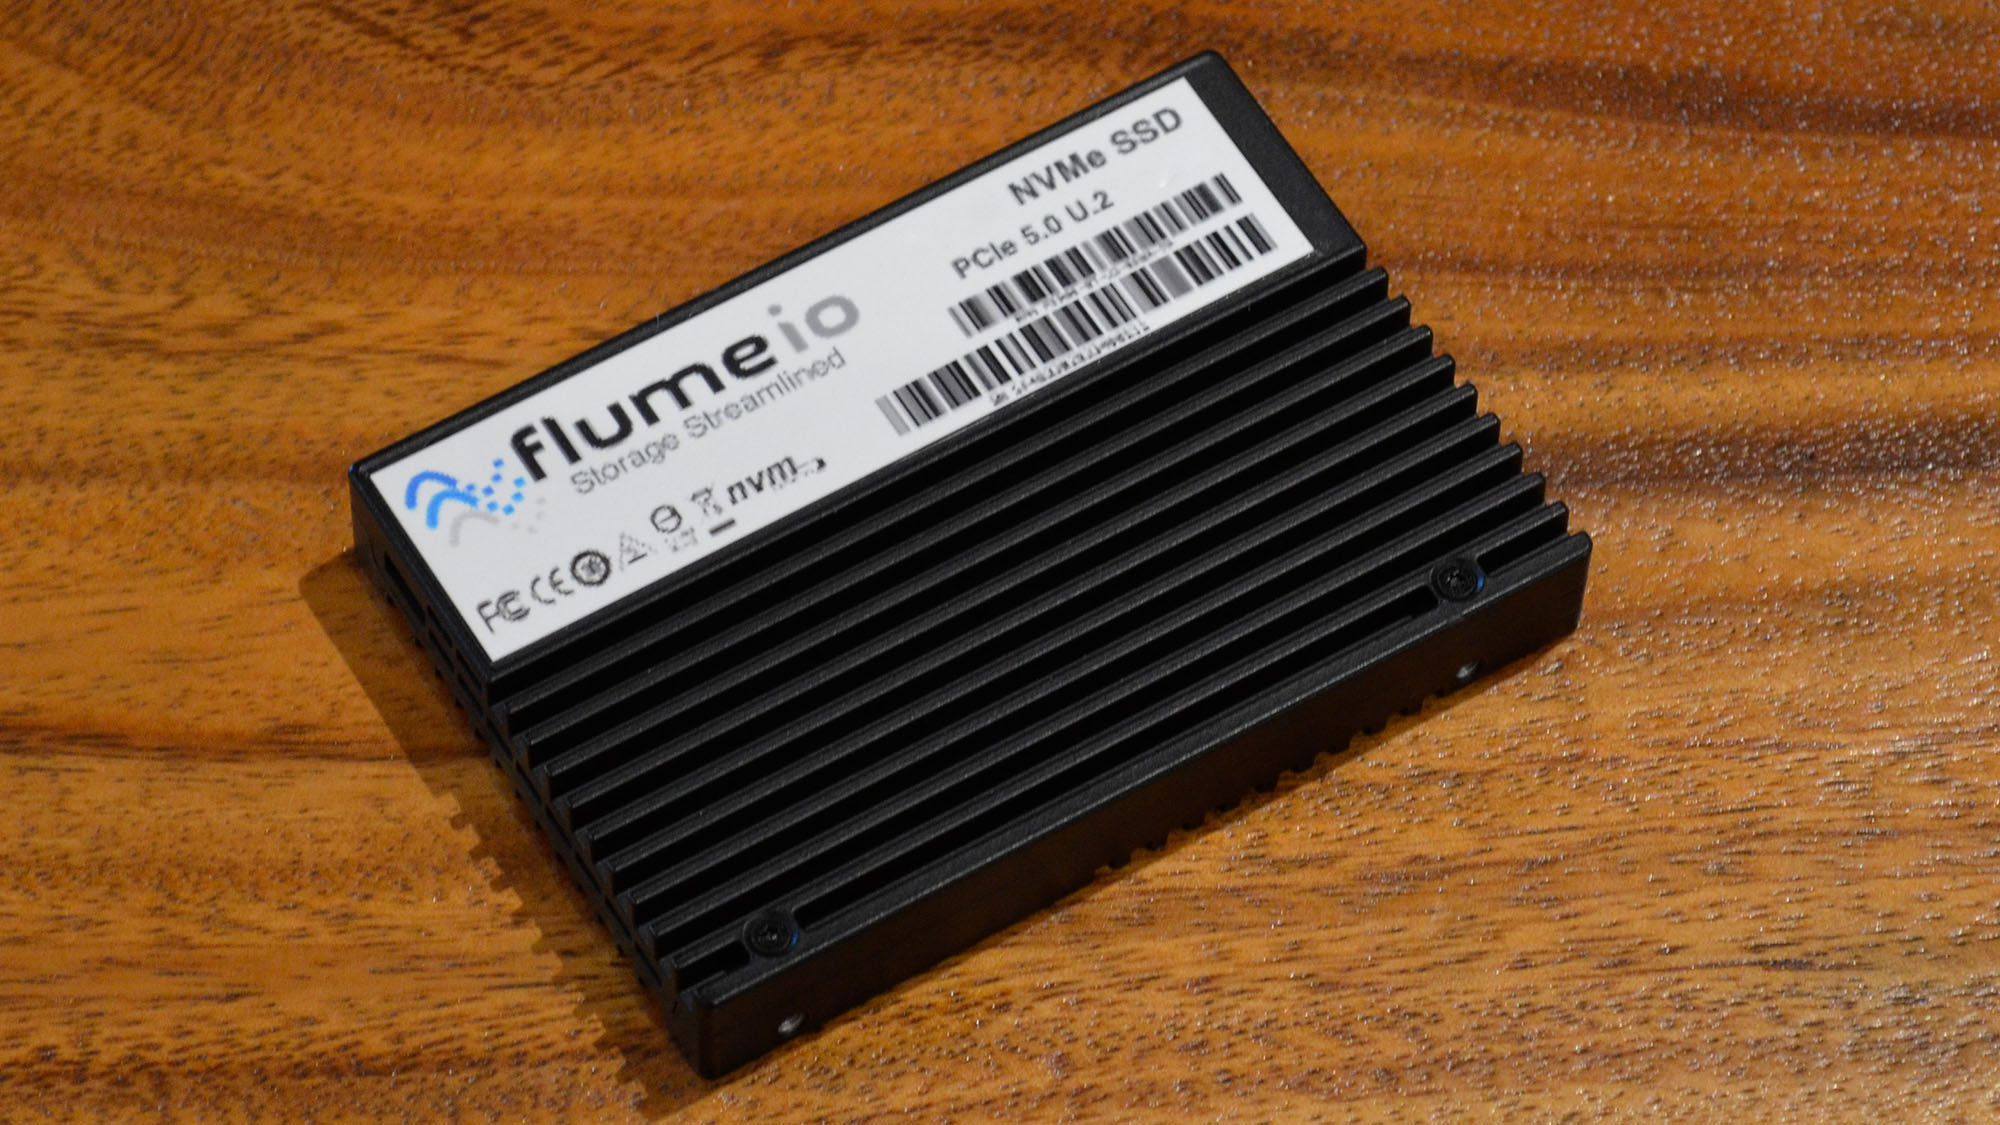 FlumeIO 5901 U.2 SSD review: as good a PCIe 5.0 enterprise drive as you're going to find